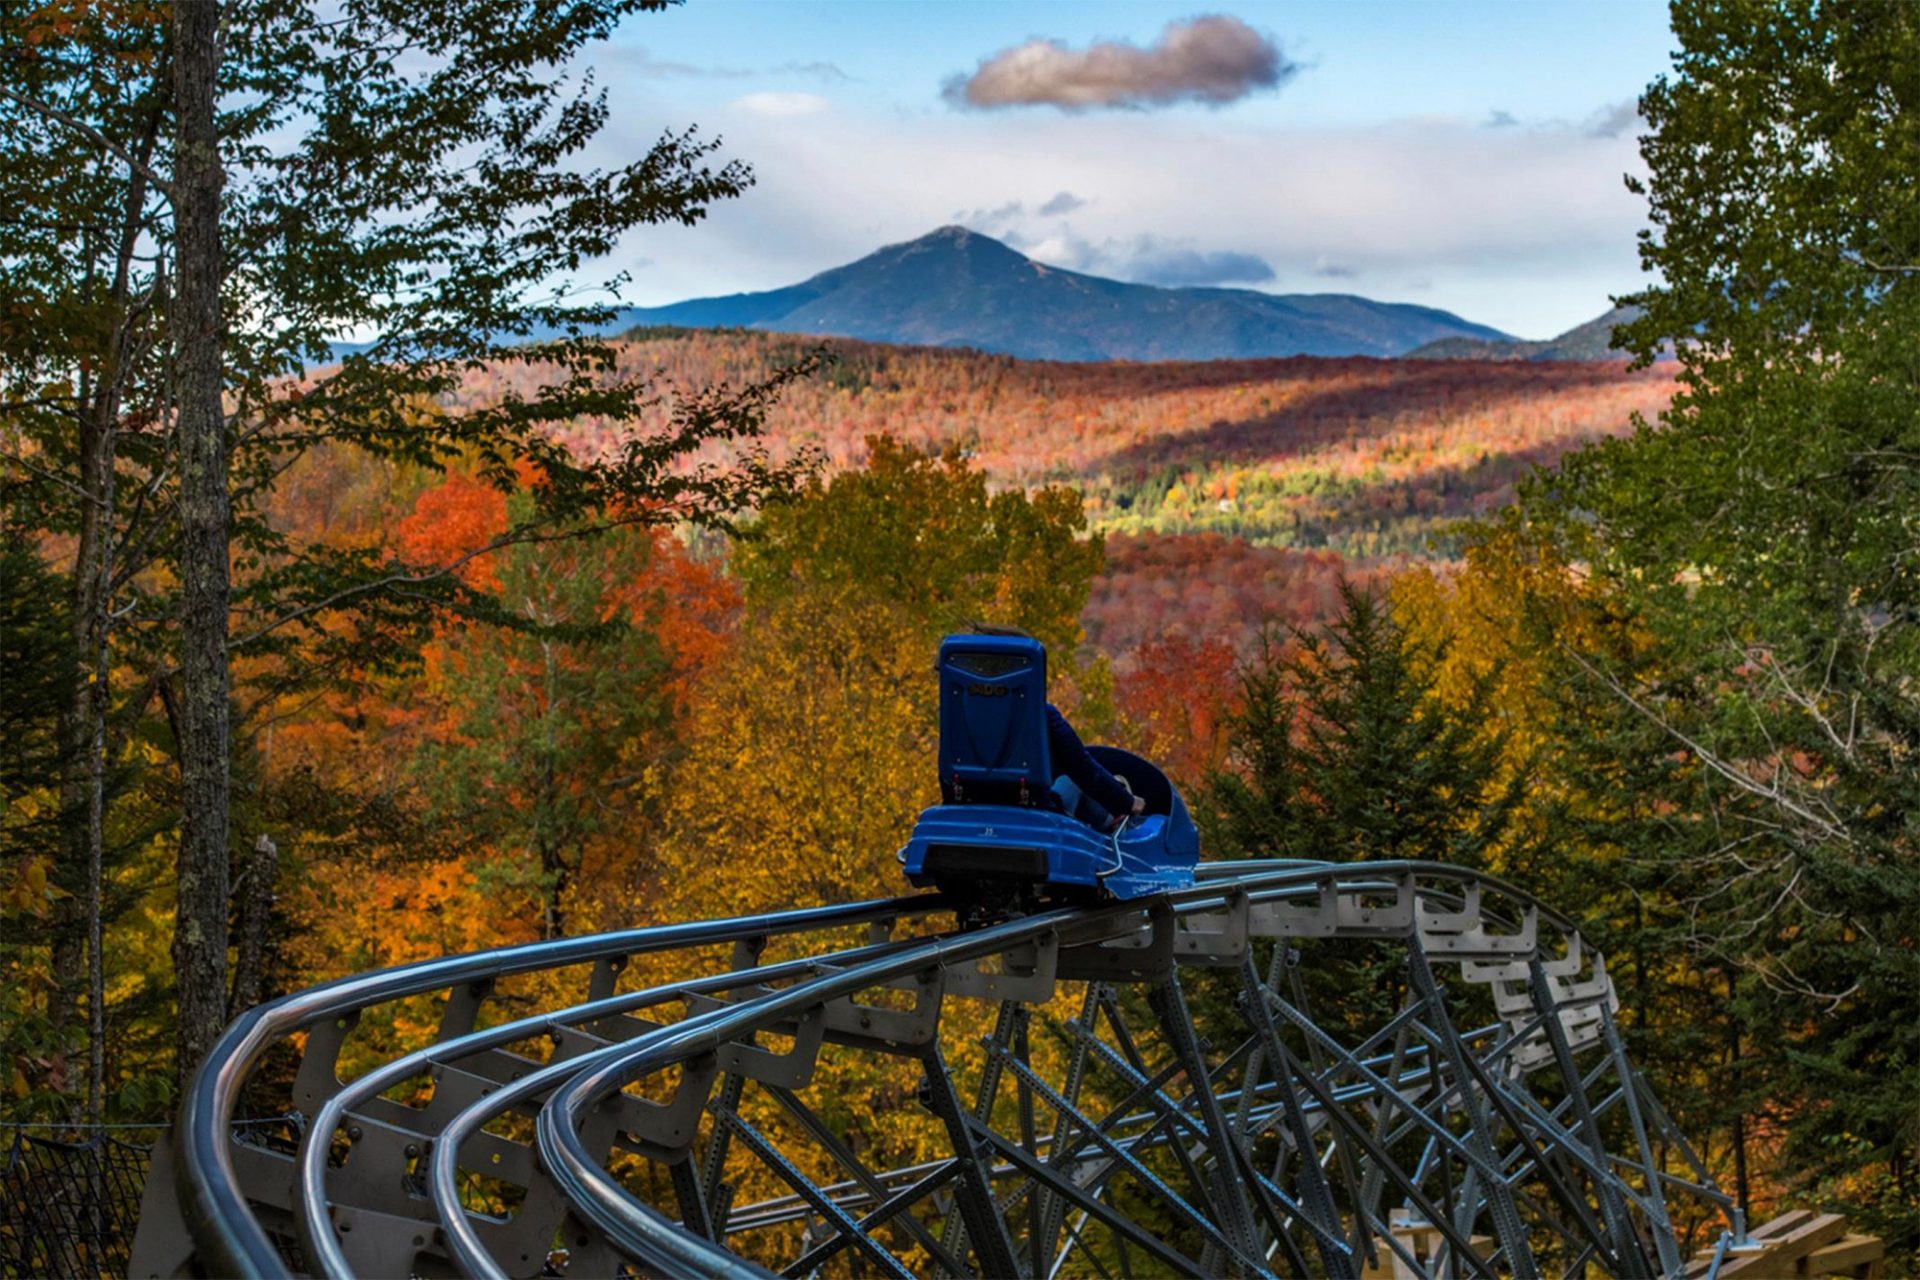 The United States’s longest mountain roller coaster opens in upstate New York